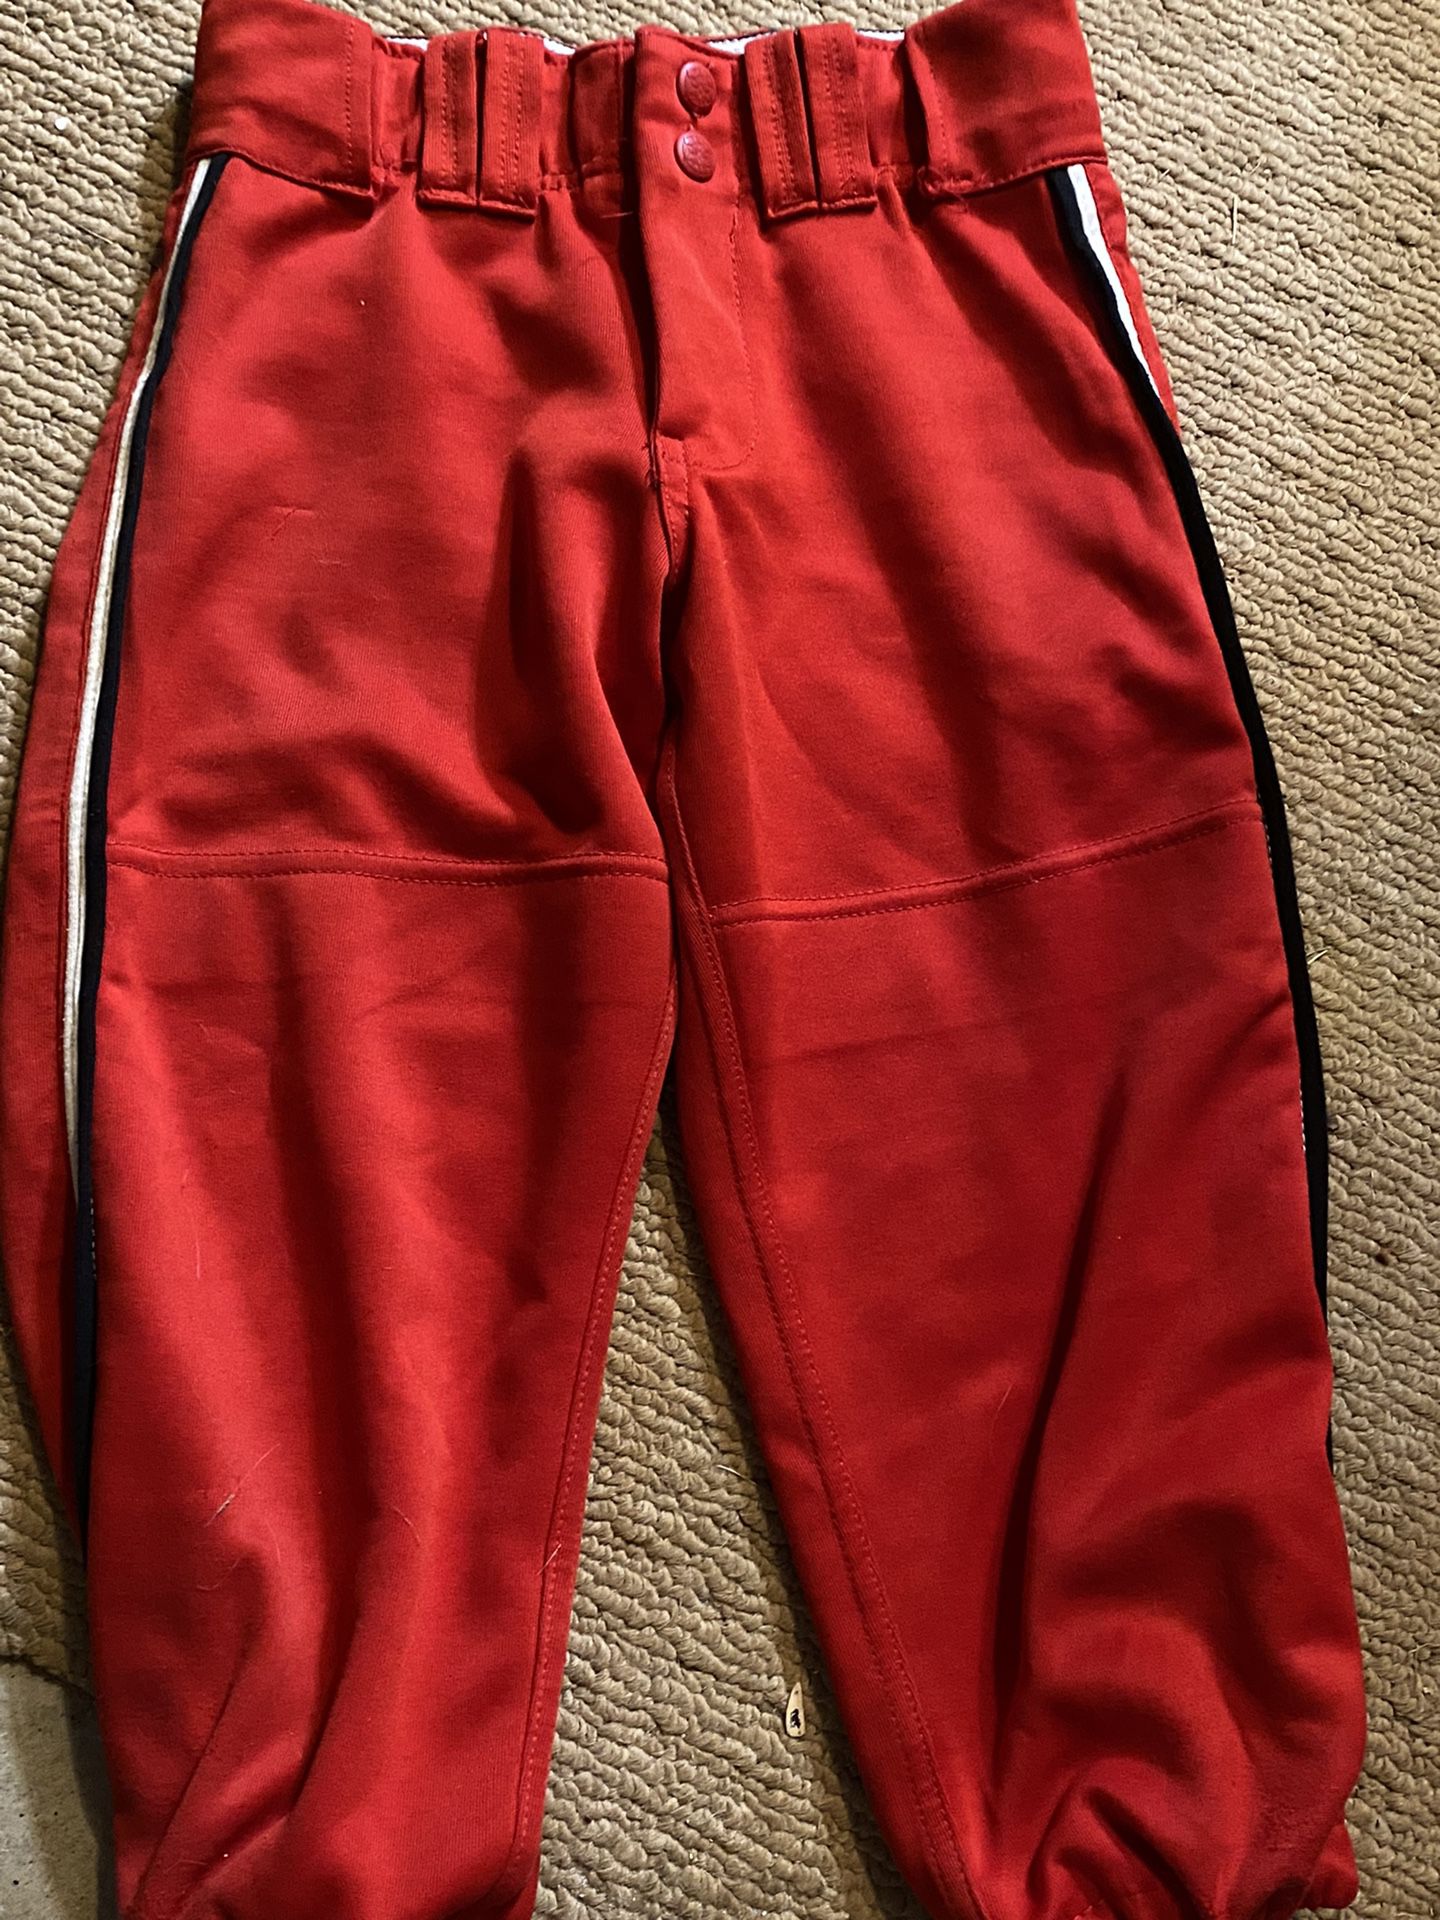 Red Softball Pants With White And Black Piping